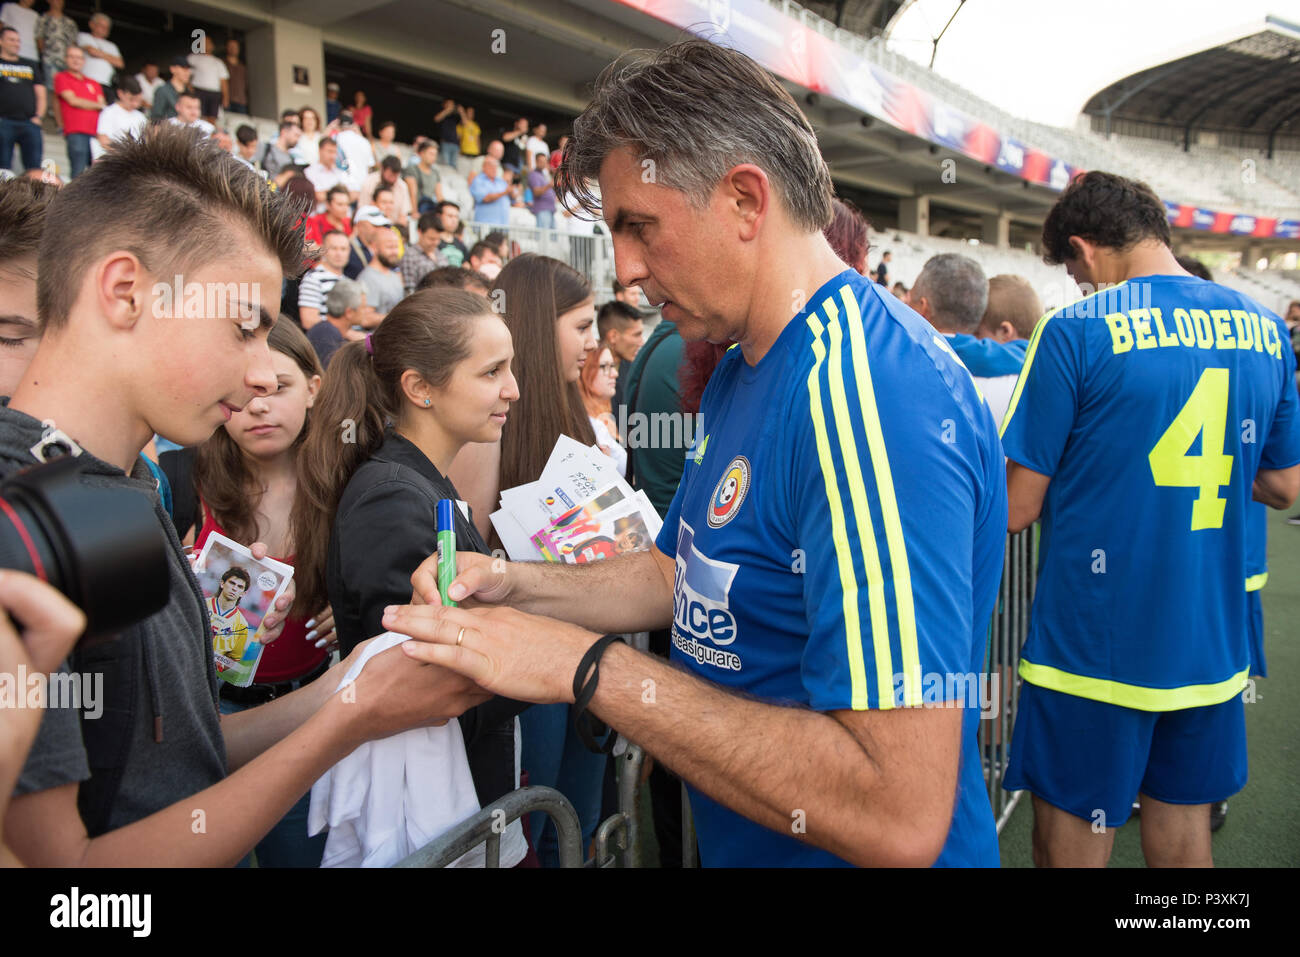 CLUJ NAPOCA, ROMANIA - JUNE 15, 2018: Football players Lupescu and Belodedici from the Golden Team signing autographs during a match against Barcelona Stock Photo